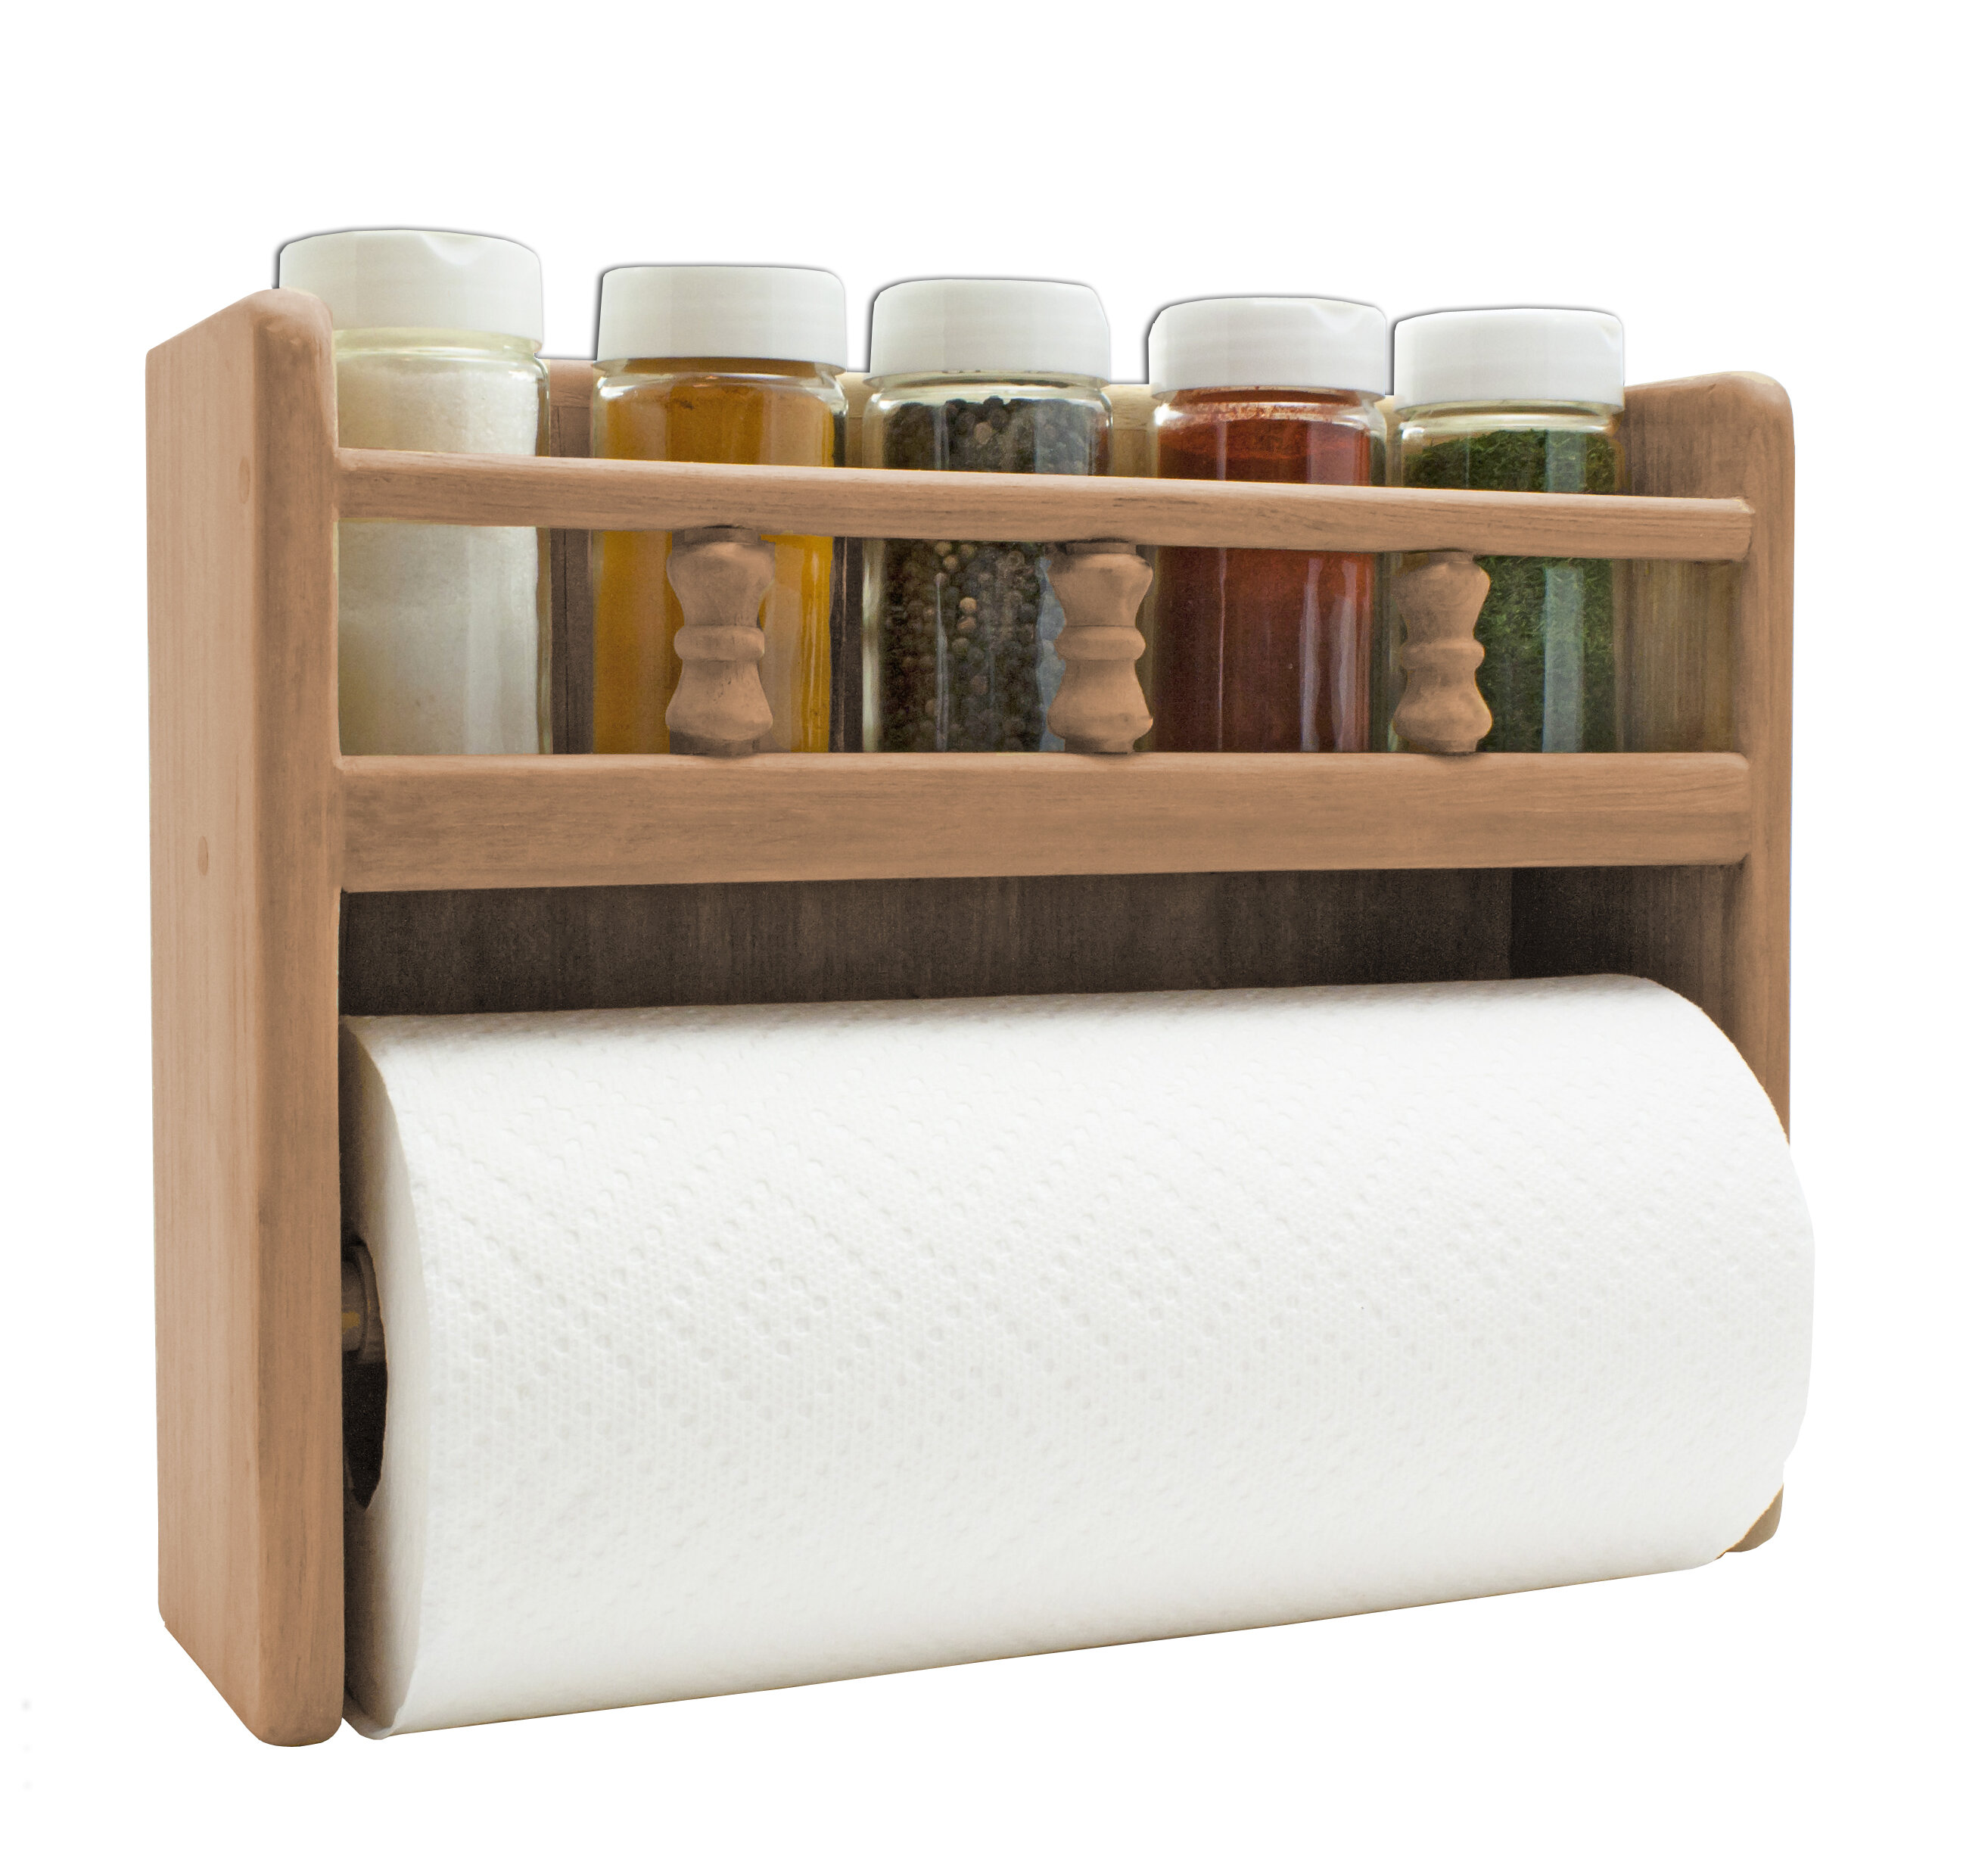 Dark Brown Wood and Black Metal Napkin Holders with Paper Towel Roll Stand  and Spice Rack